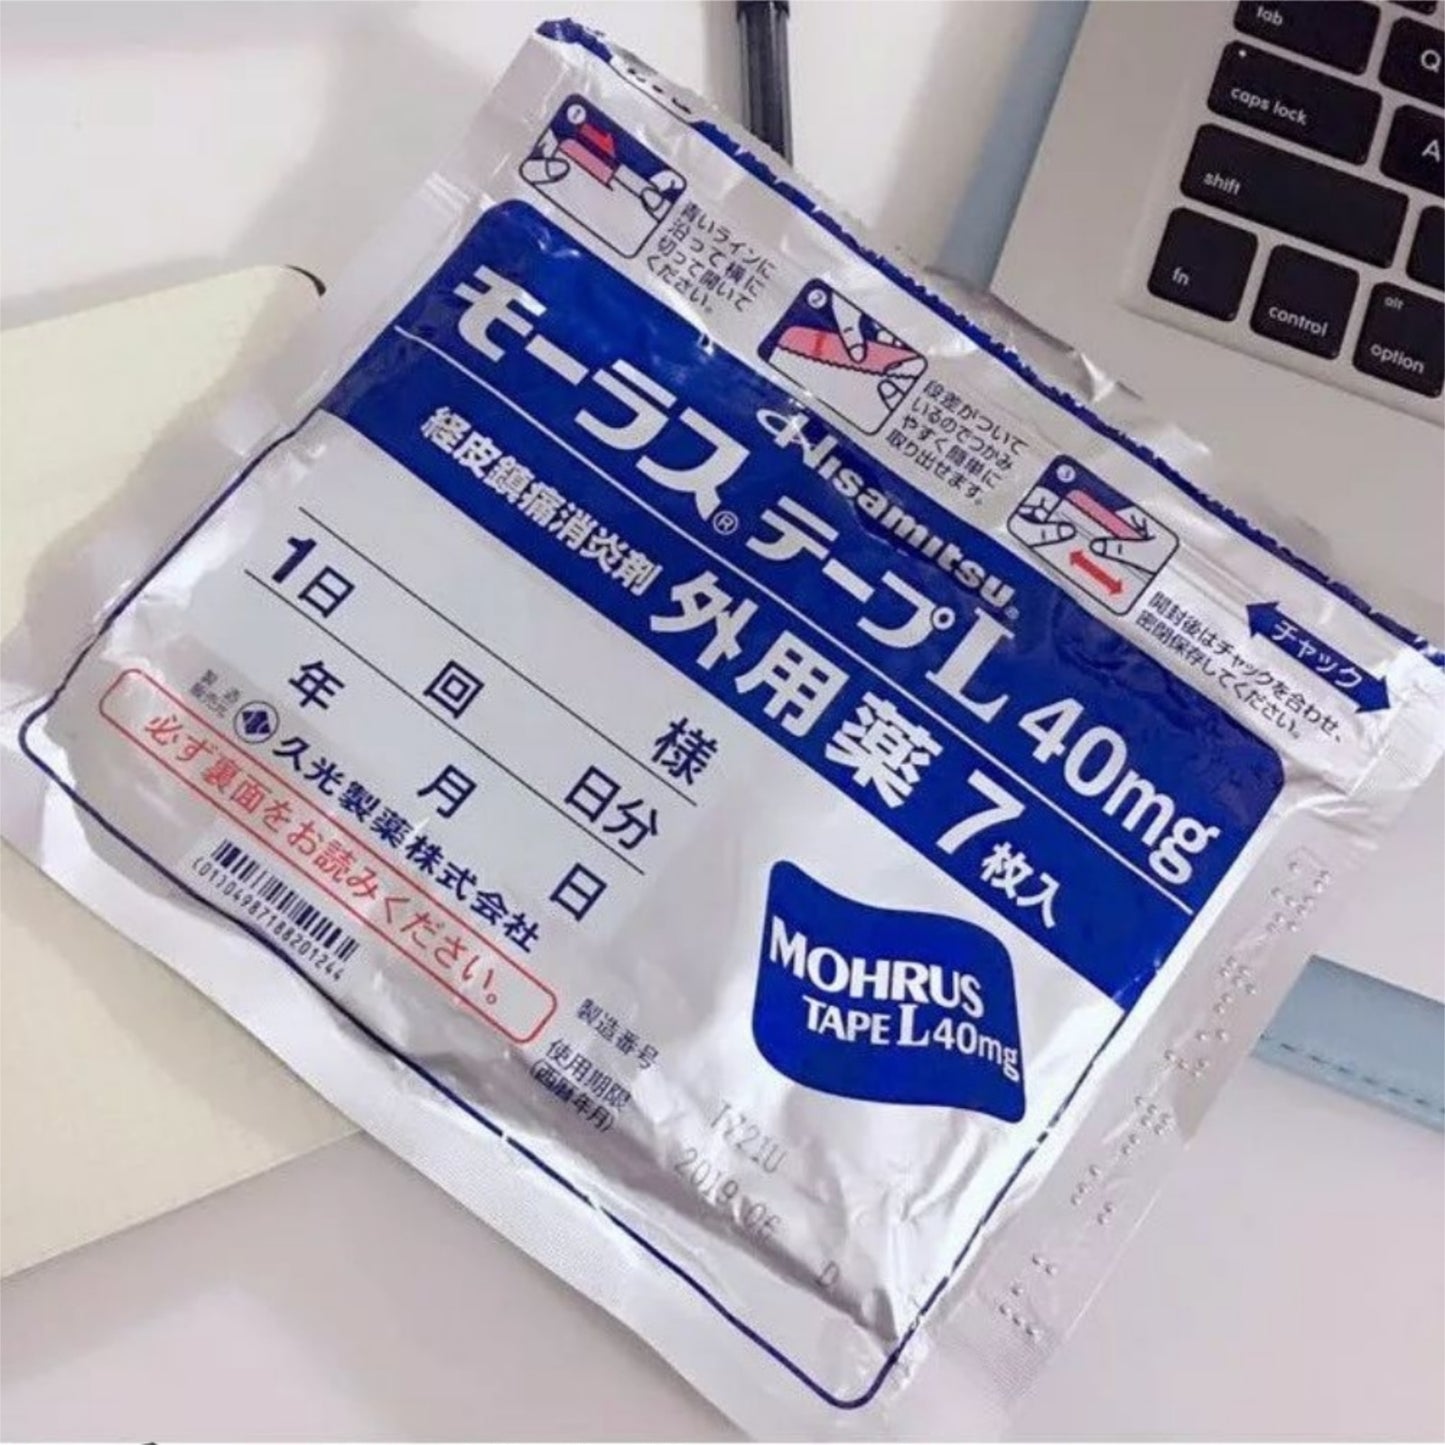 
                  
                    【Bulk Buy】HISAMITSU MOHRUS Tape L 40mg Muscle Pain Relief 7 Patch x 7
                  
                